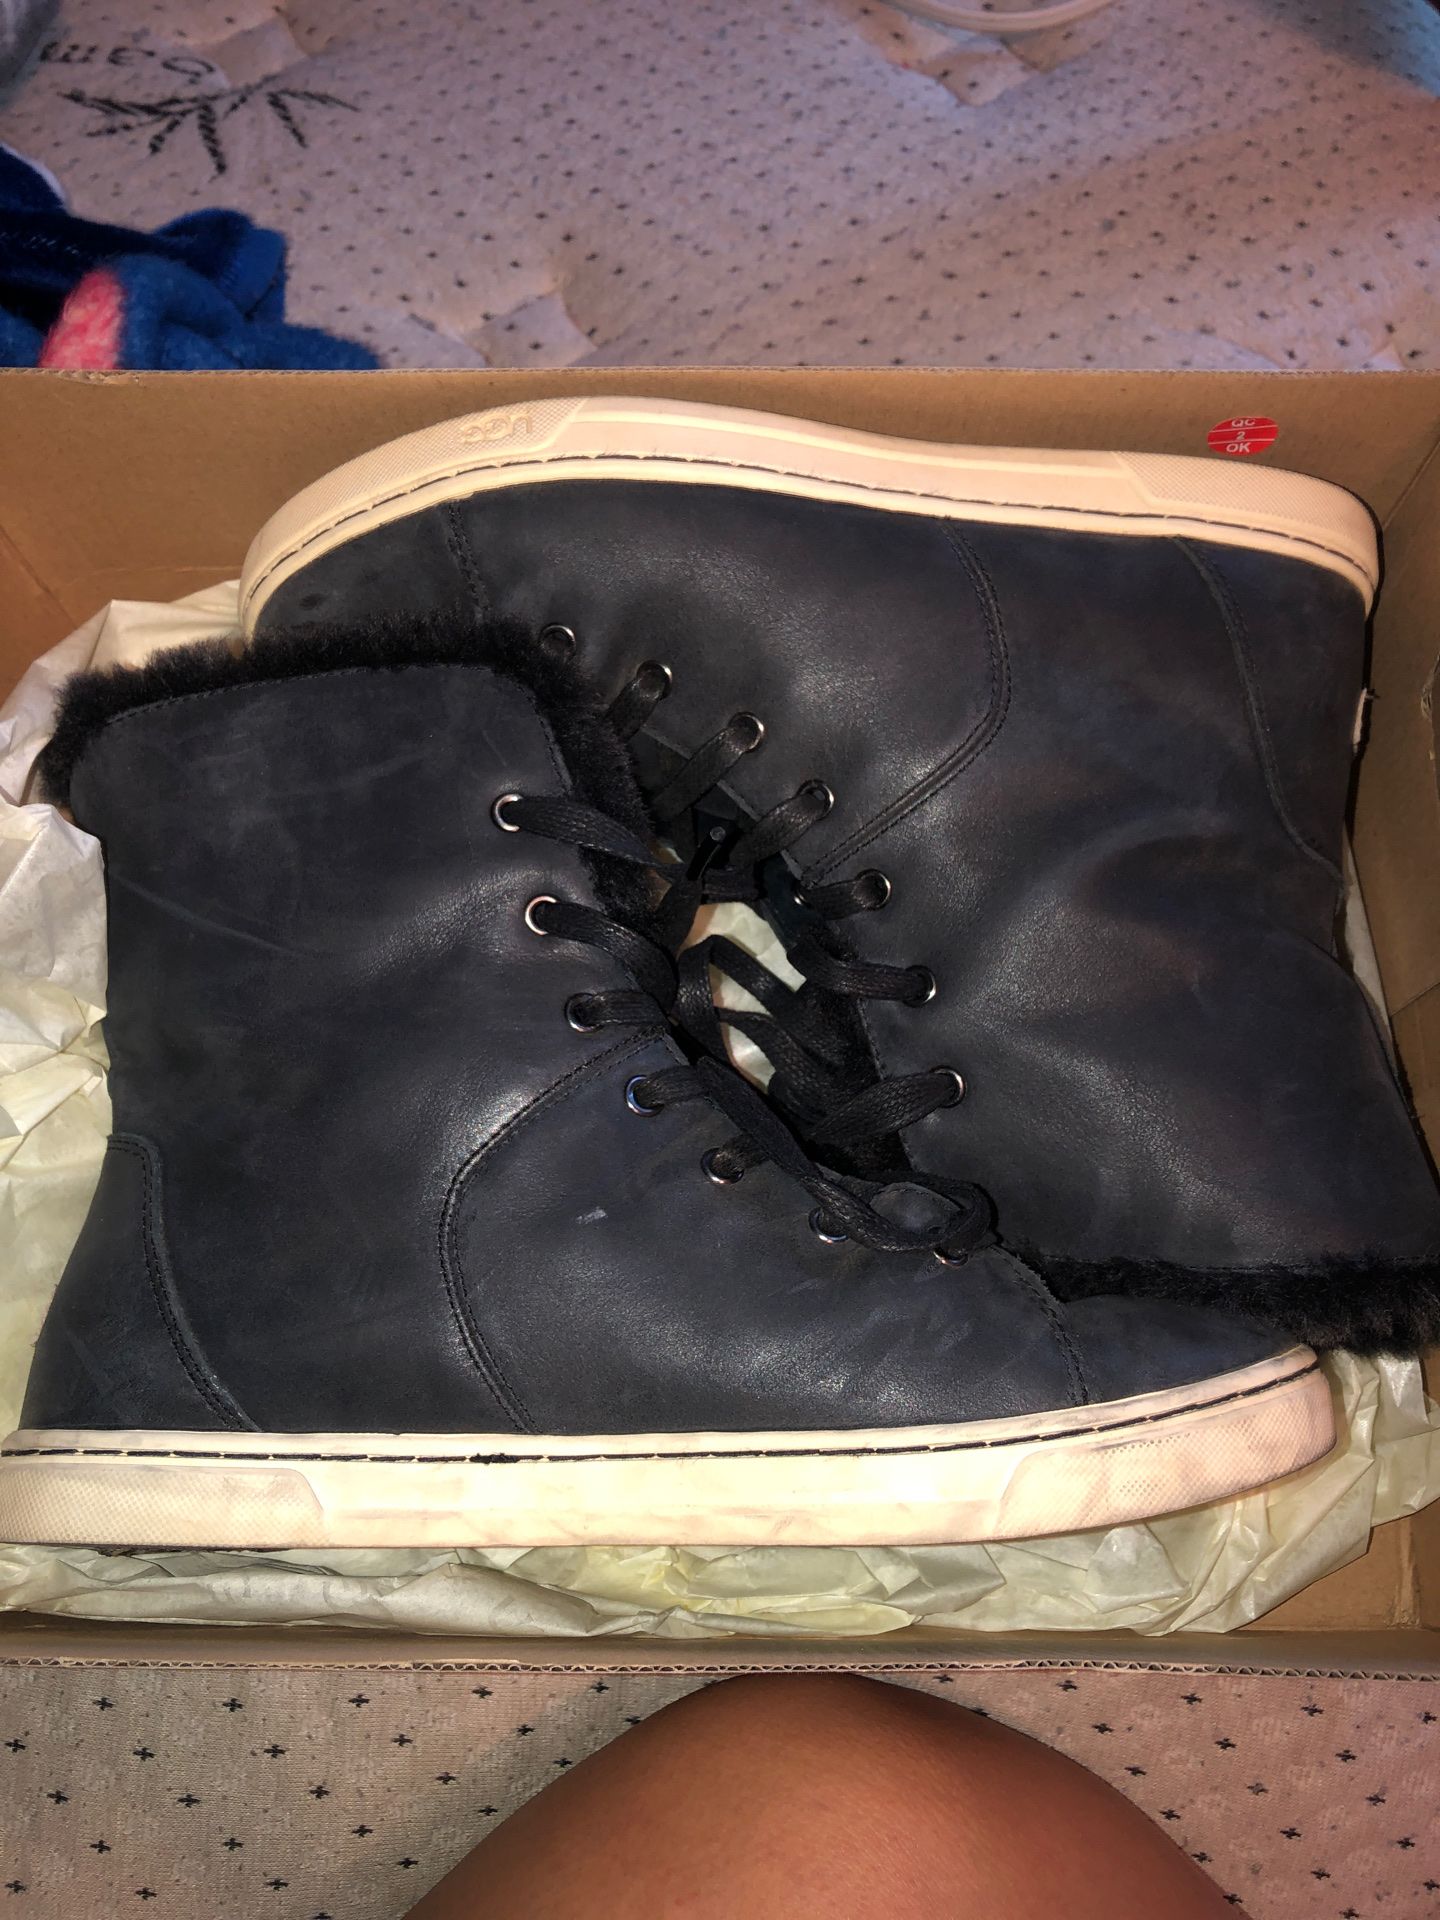 UGG high top sneakers with fur inside CHEAP! WILL GO FAST